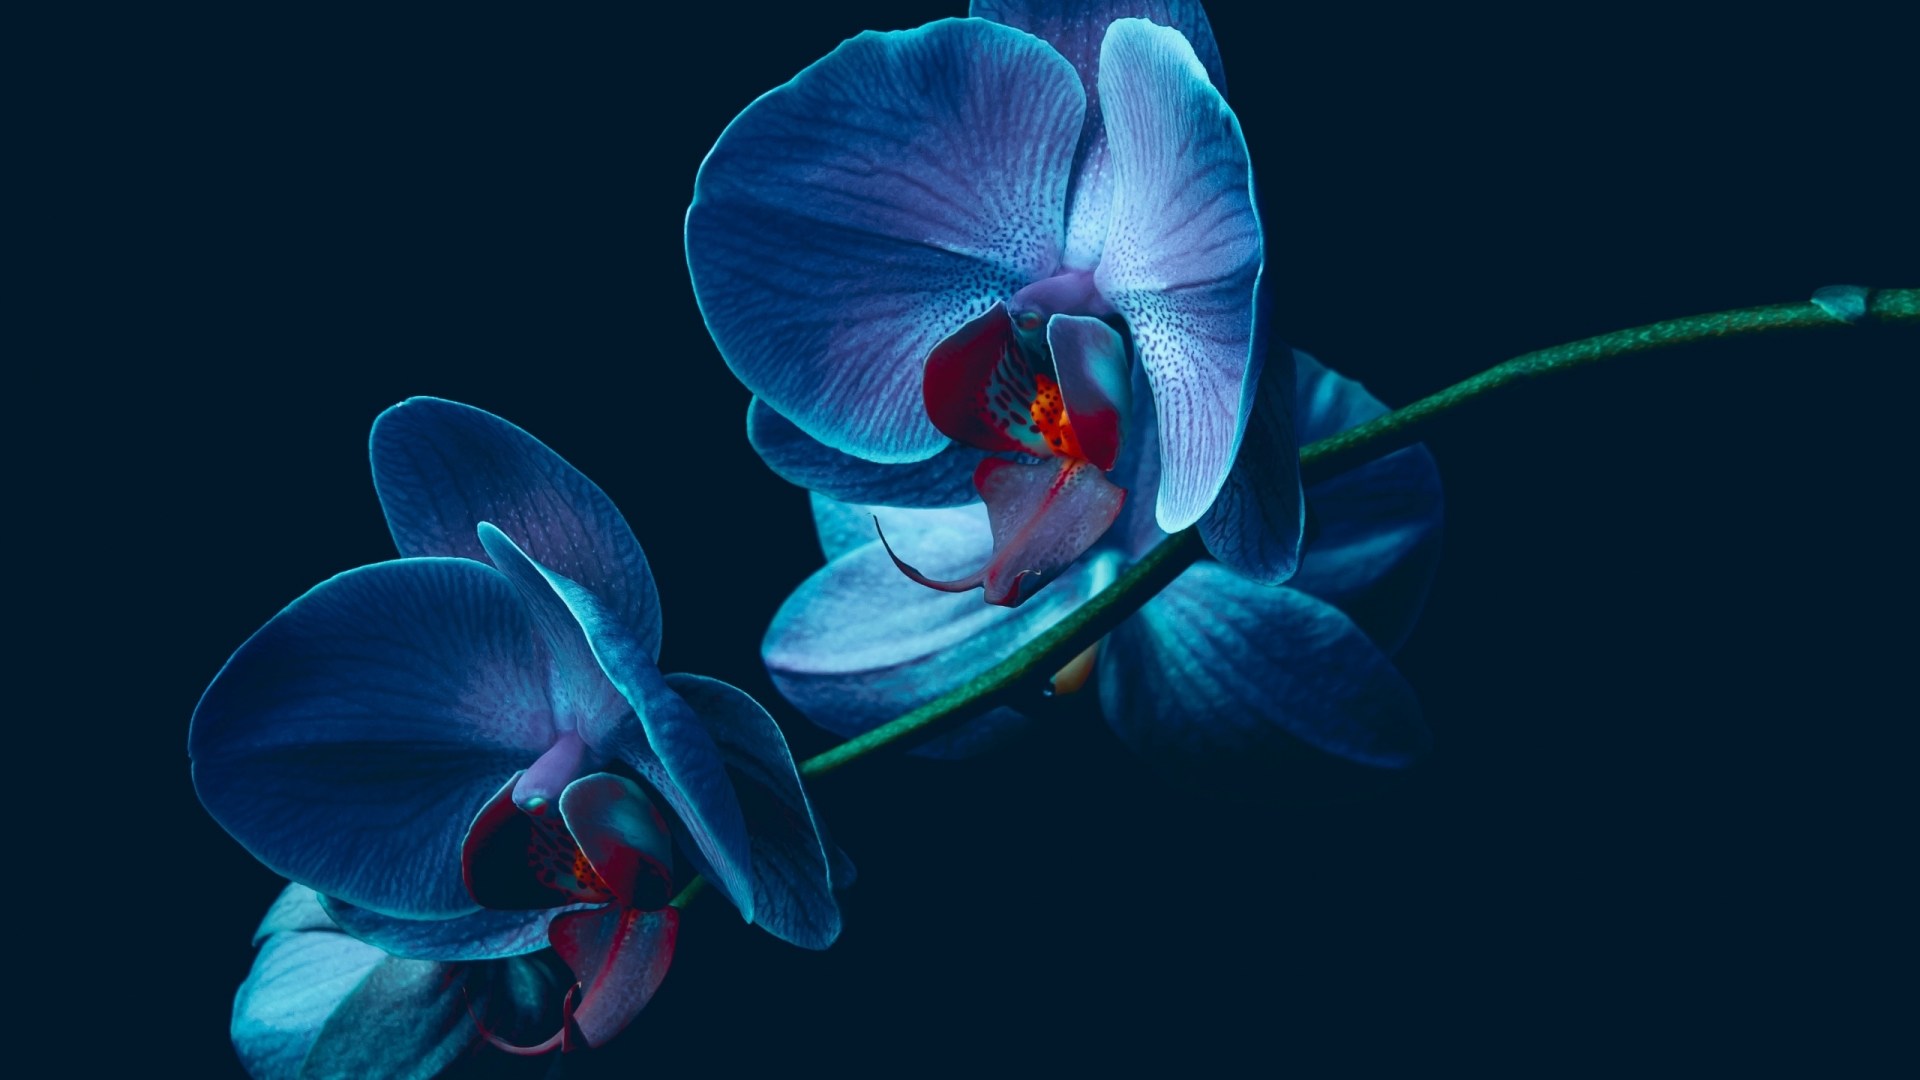 Blue Orchid Good Morning